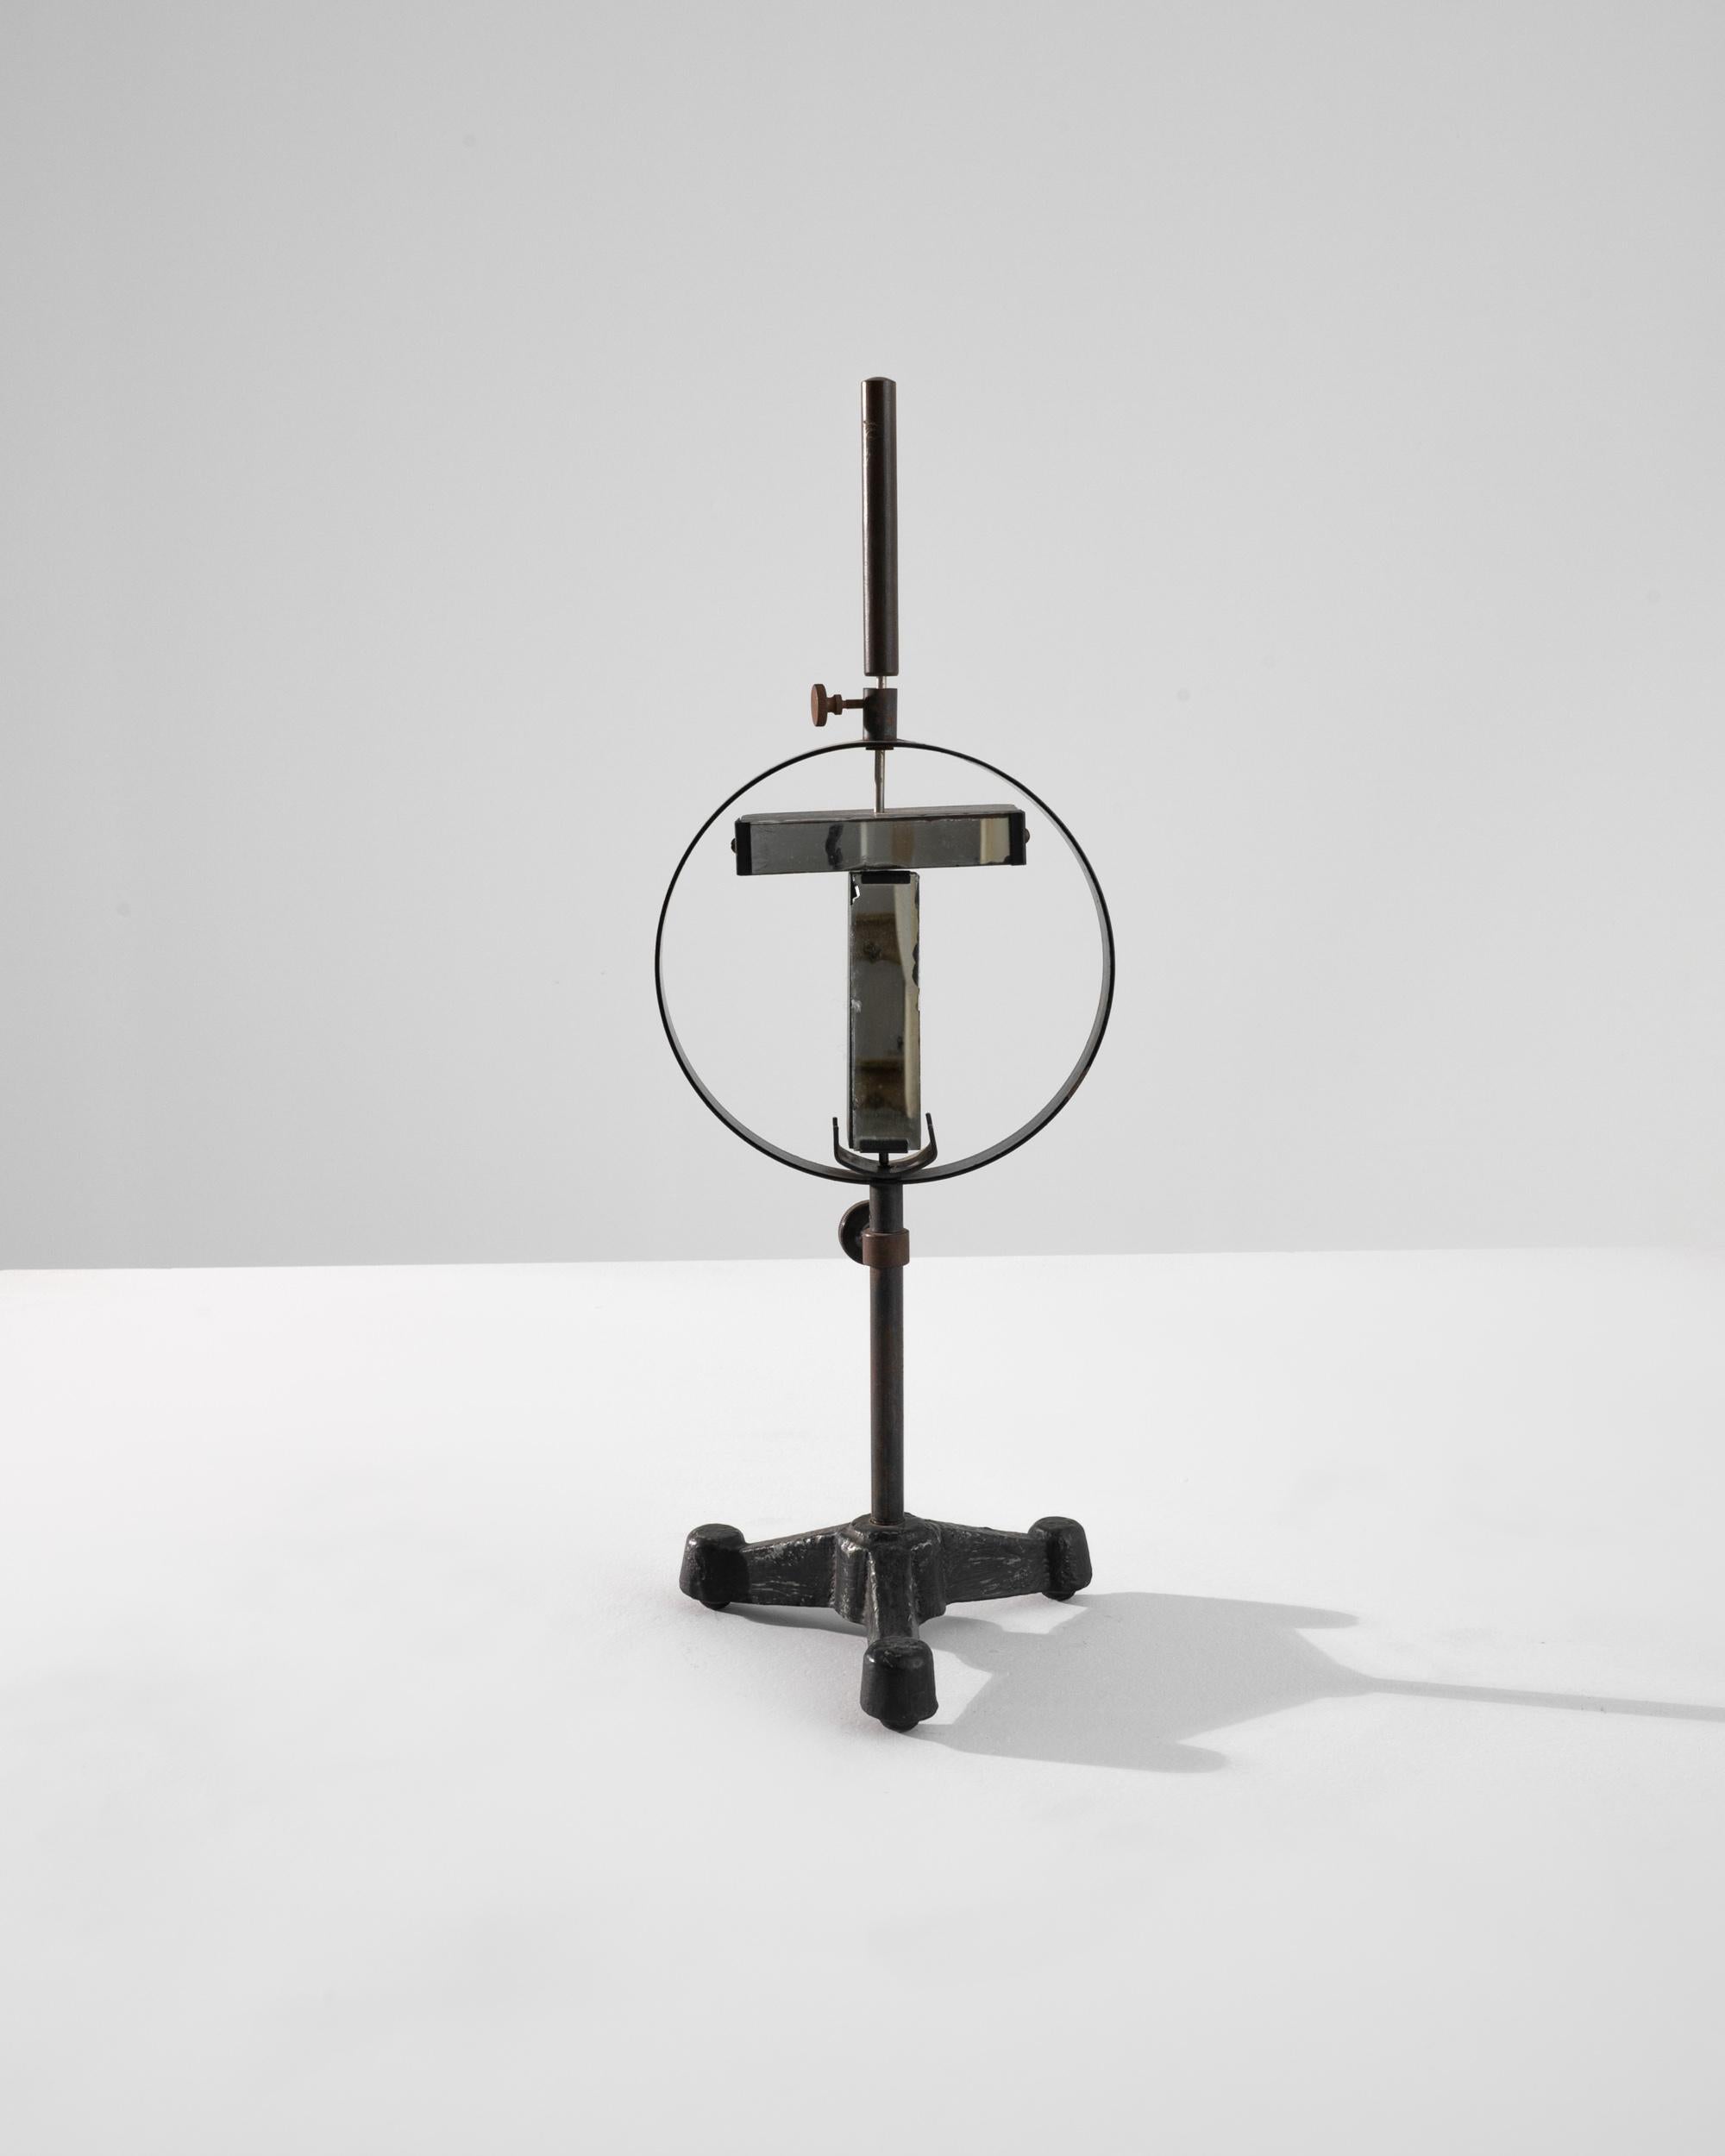 A metal decoration from 20th century Czechia. A cast base, along with metal tubes, bands, and adjustable bolts creates the image of a scientific object, whose purpose remains opaque. Characteristic of 20th century Czechian sensibilities, this